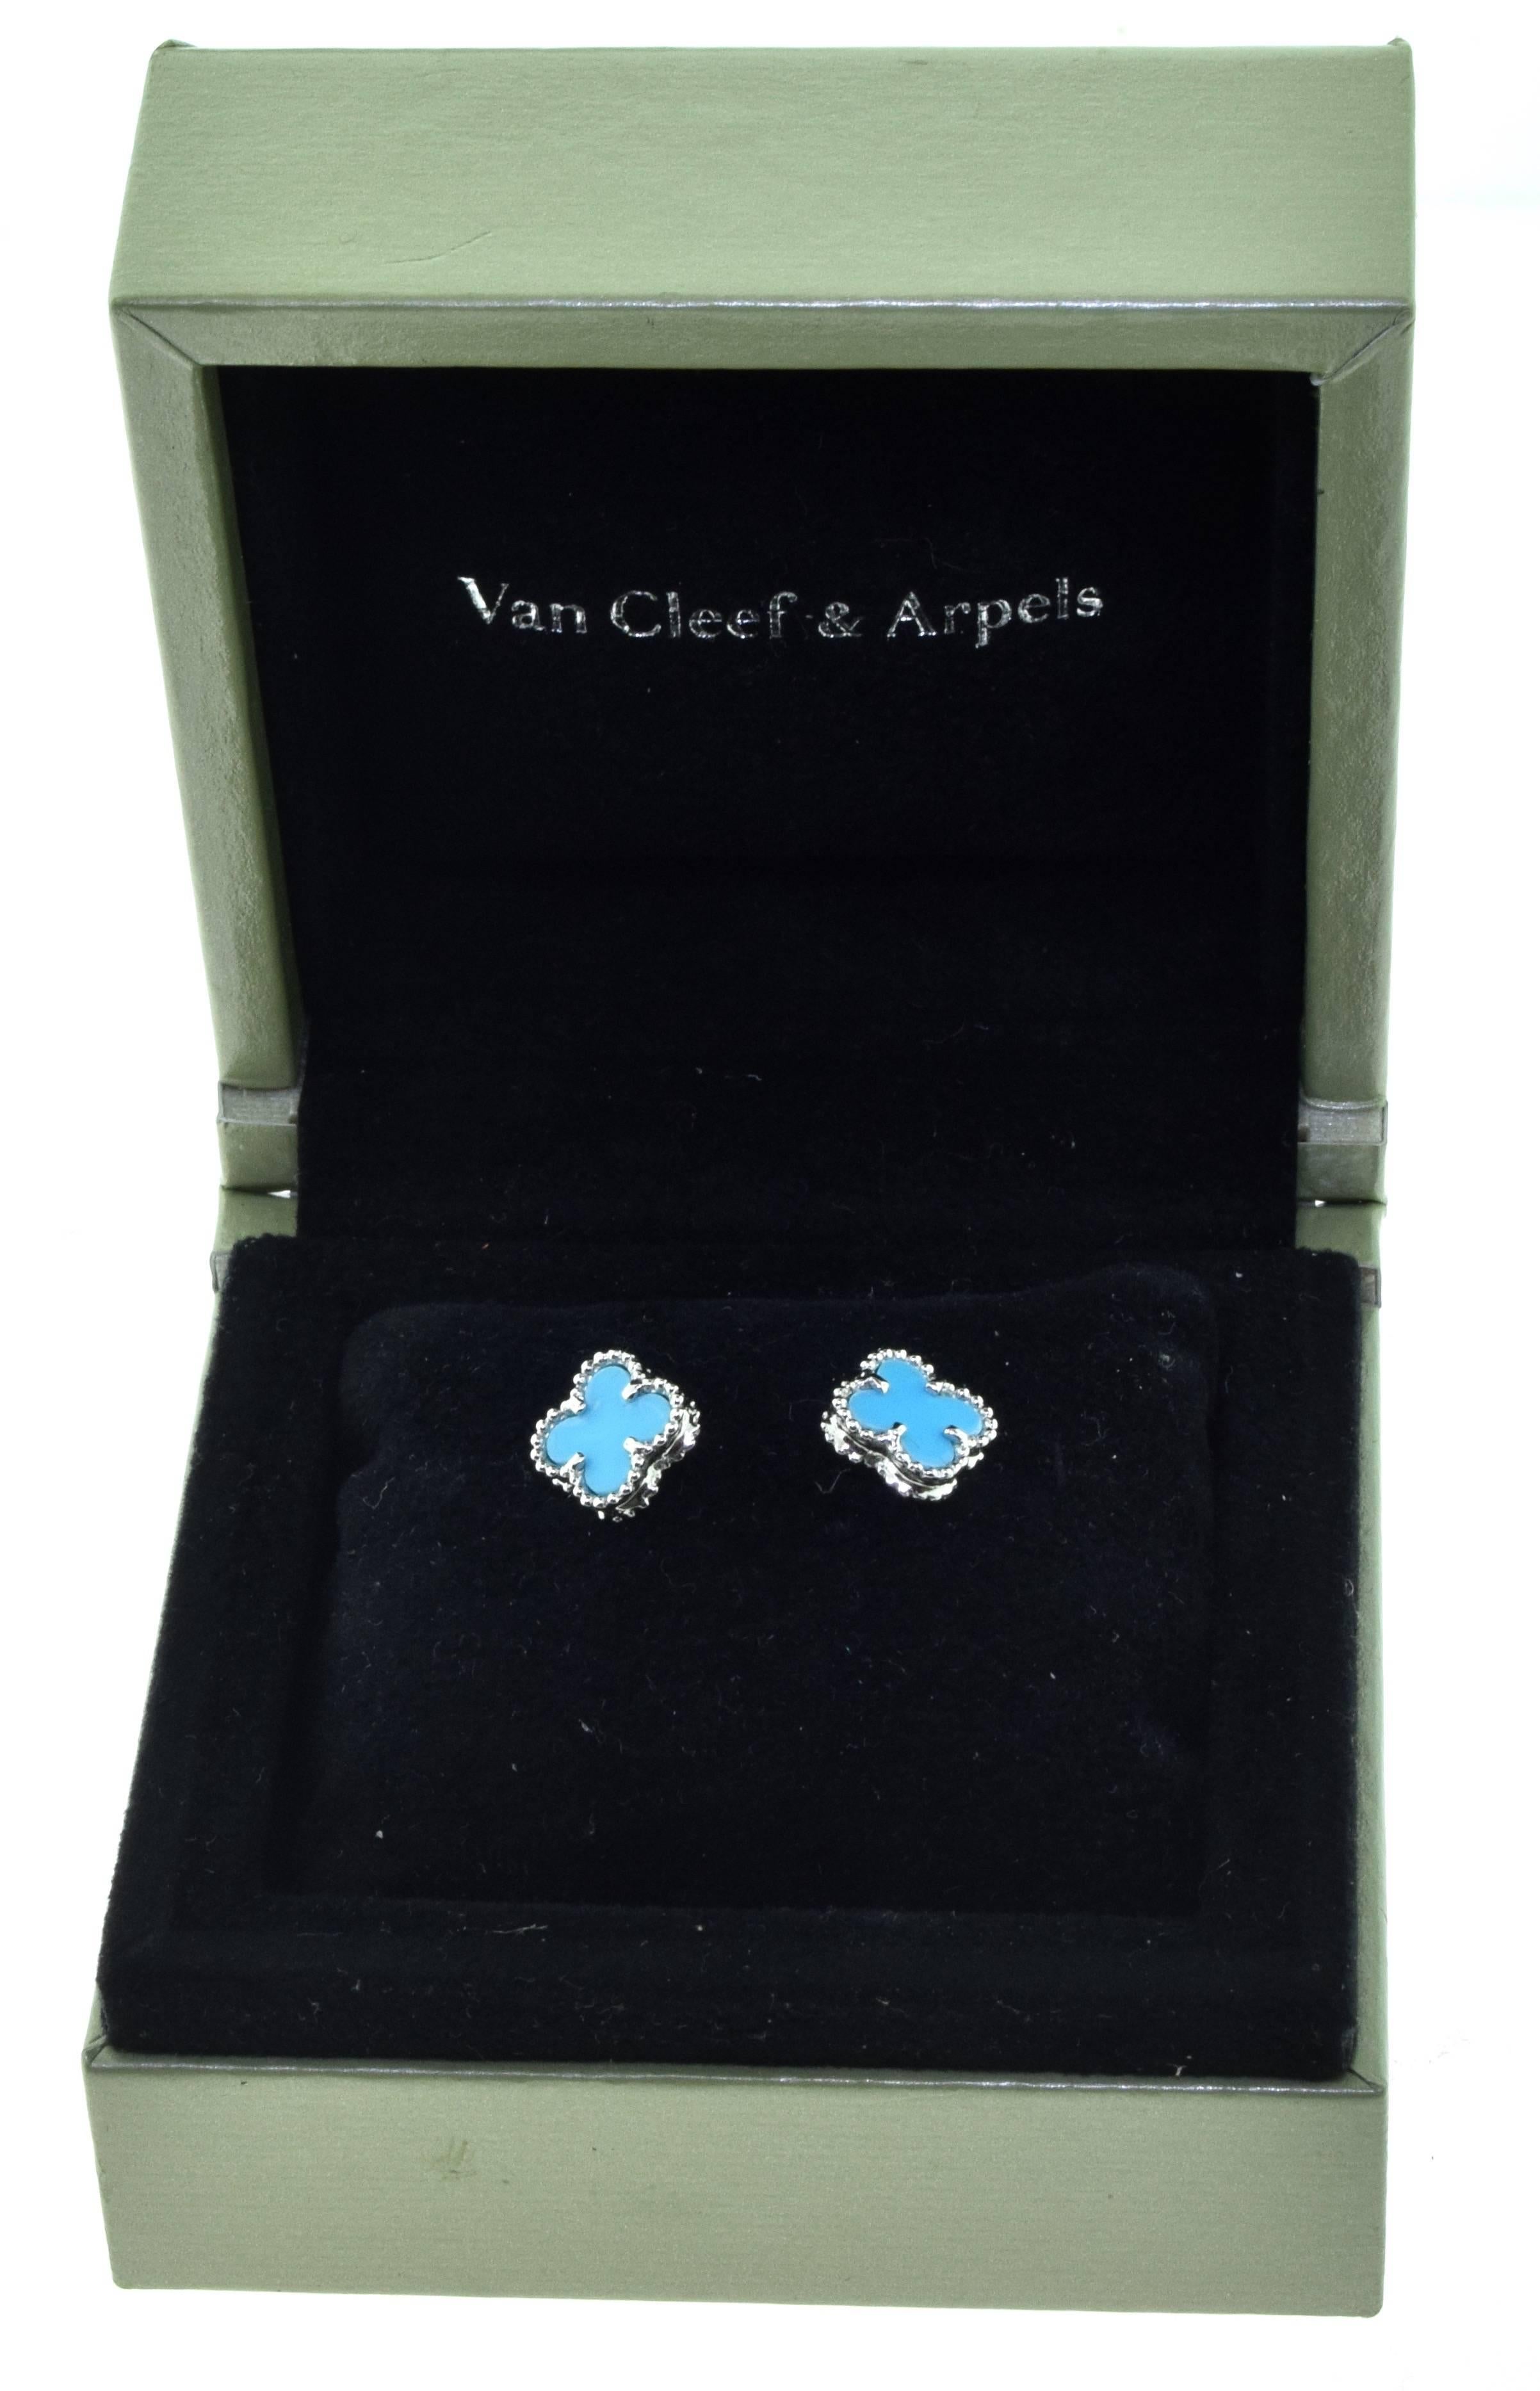 Designer: Van Cleef & Arpels
Collection: Sweet Alhambra
Metal: White Gold
Metal Purity: 18k
Stones: Turquoise
Total Item Weight (grams): 1.6
Motif Dimensions: approx. 7.96 x 9.30 mm

About the collection:
Light and delicate, the Sweet Alhambra